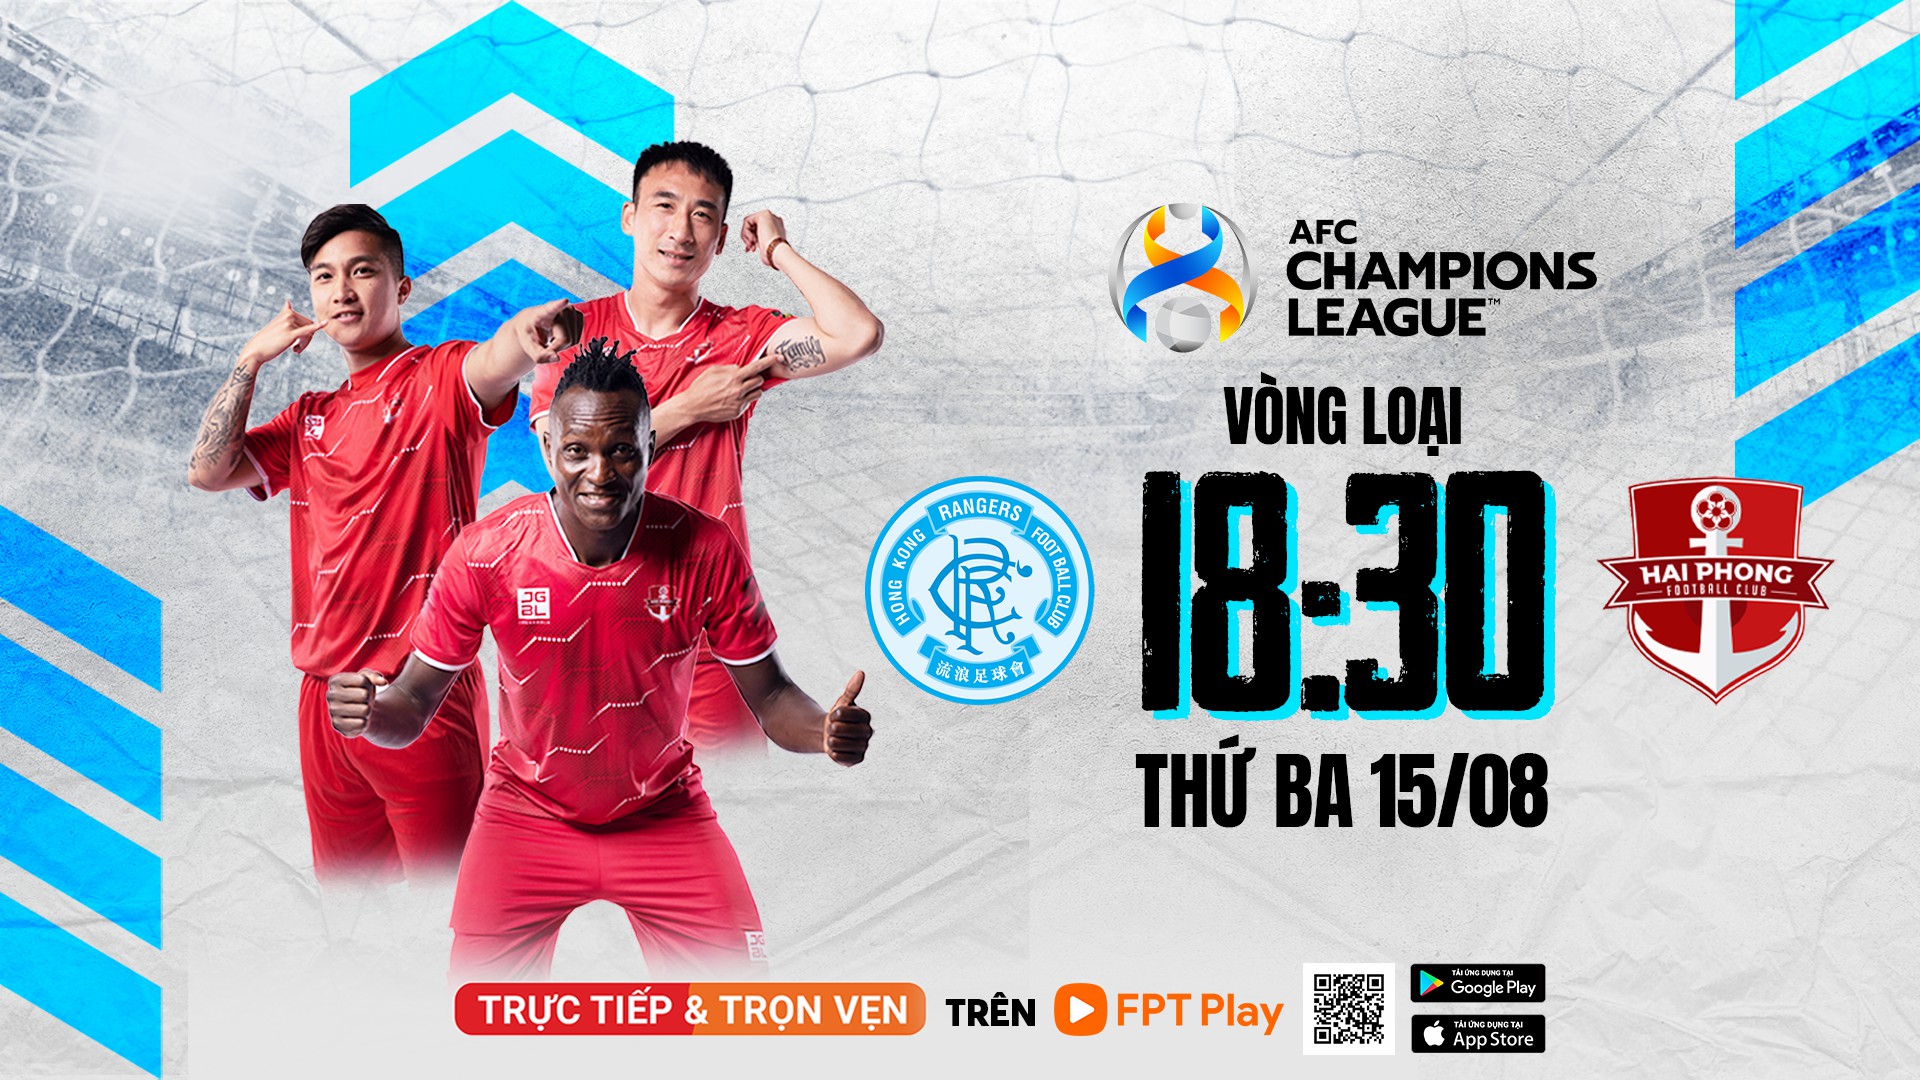 fpt play, AFC champions league